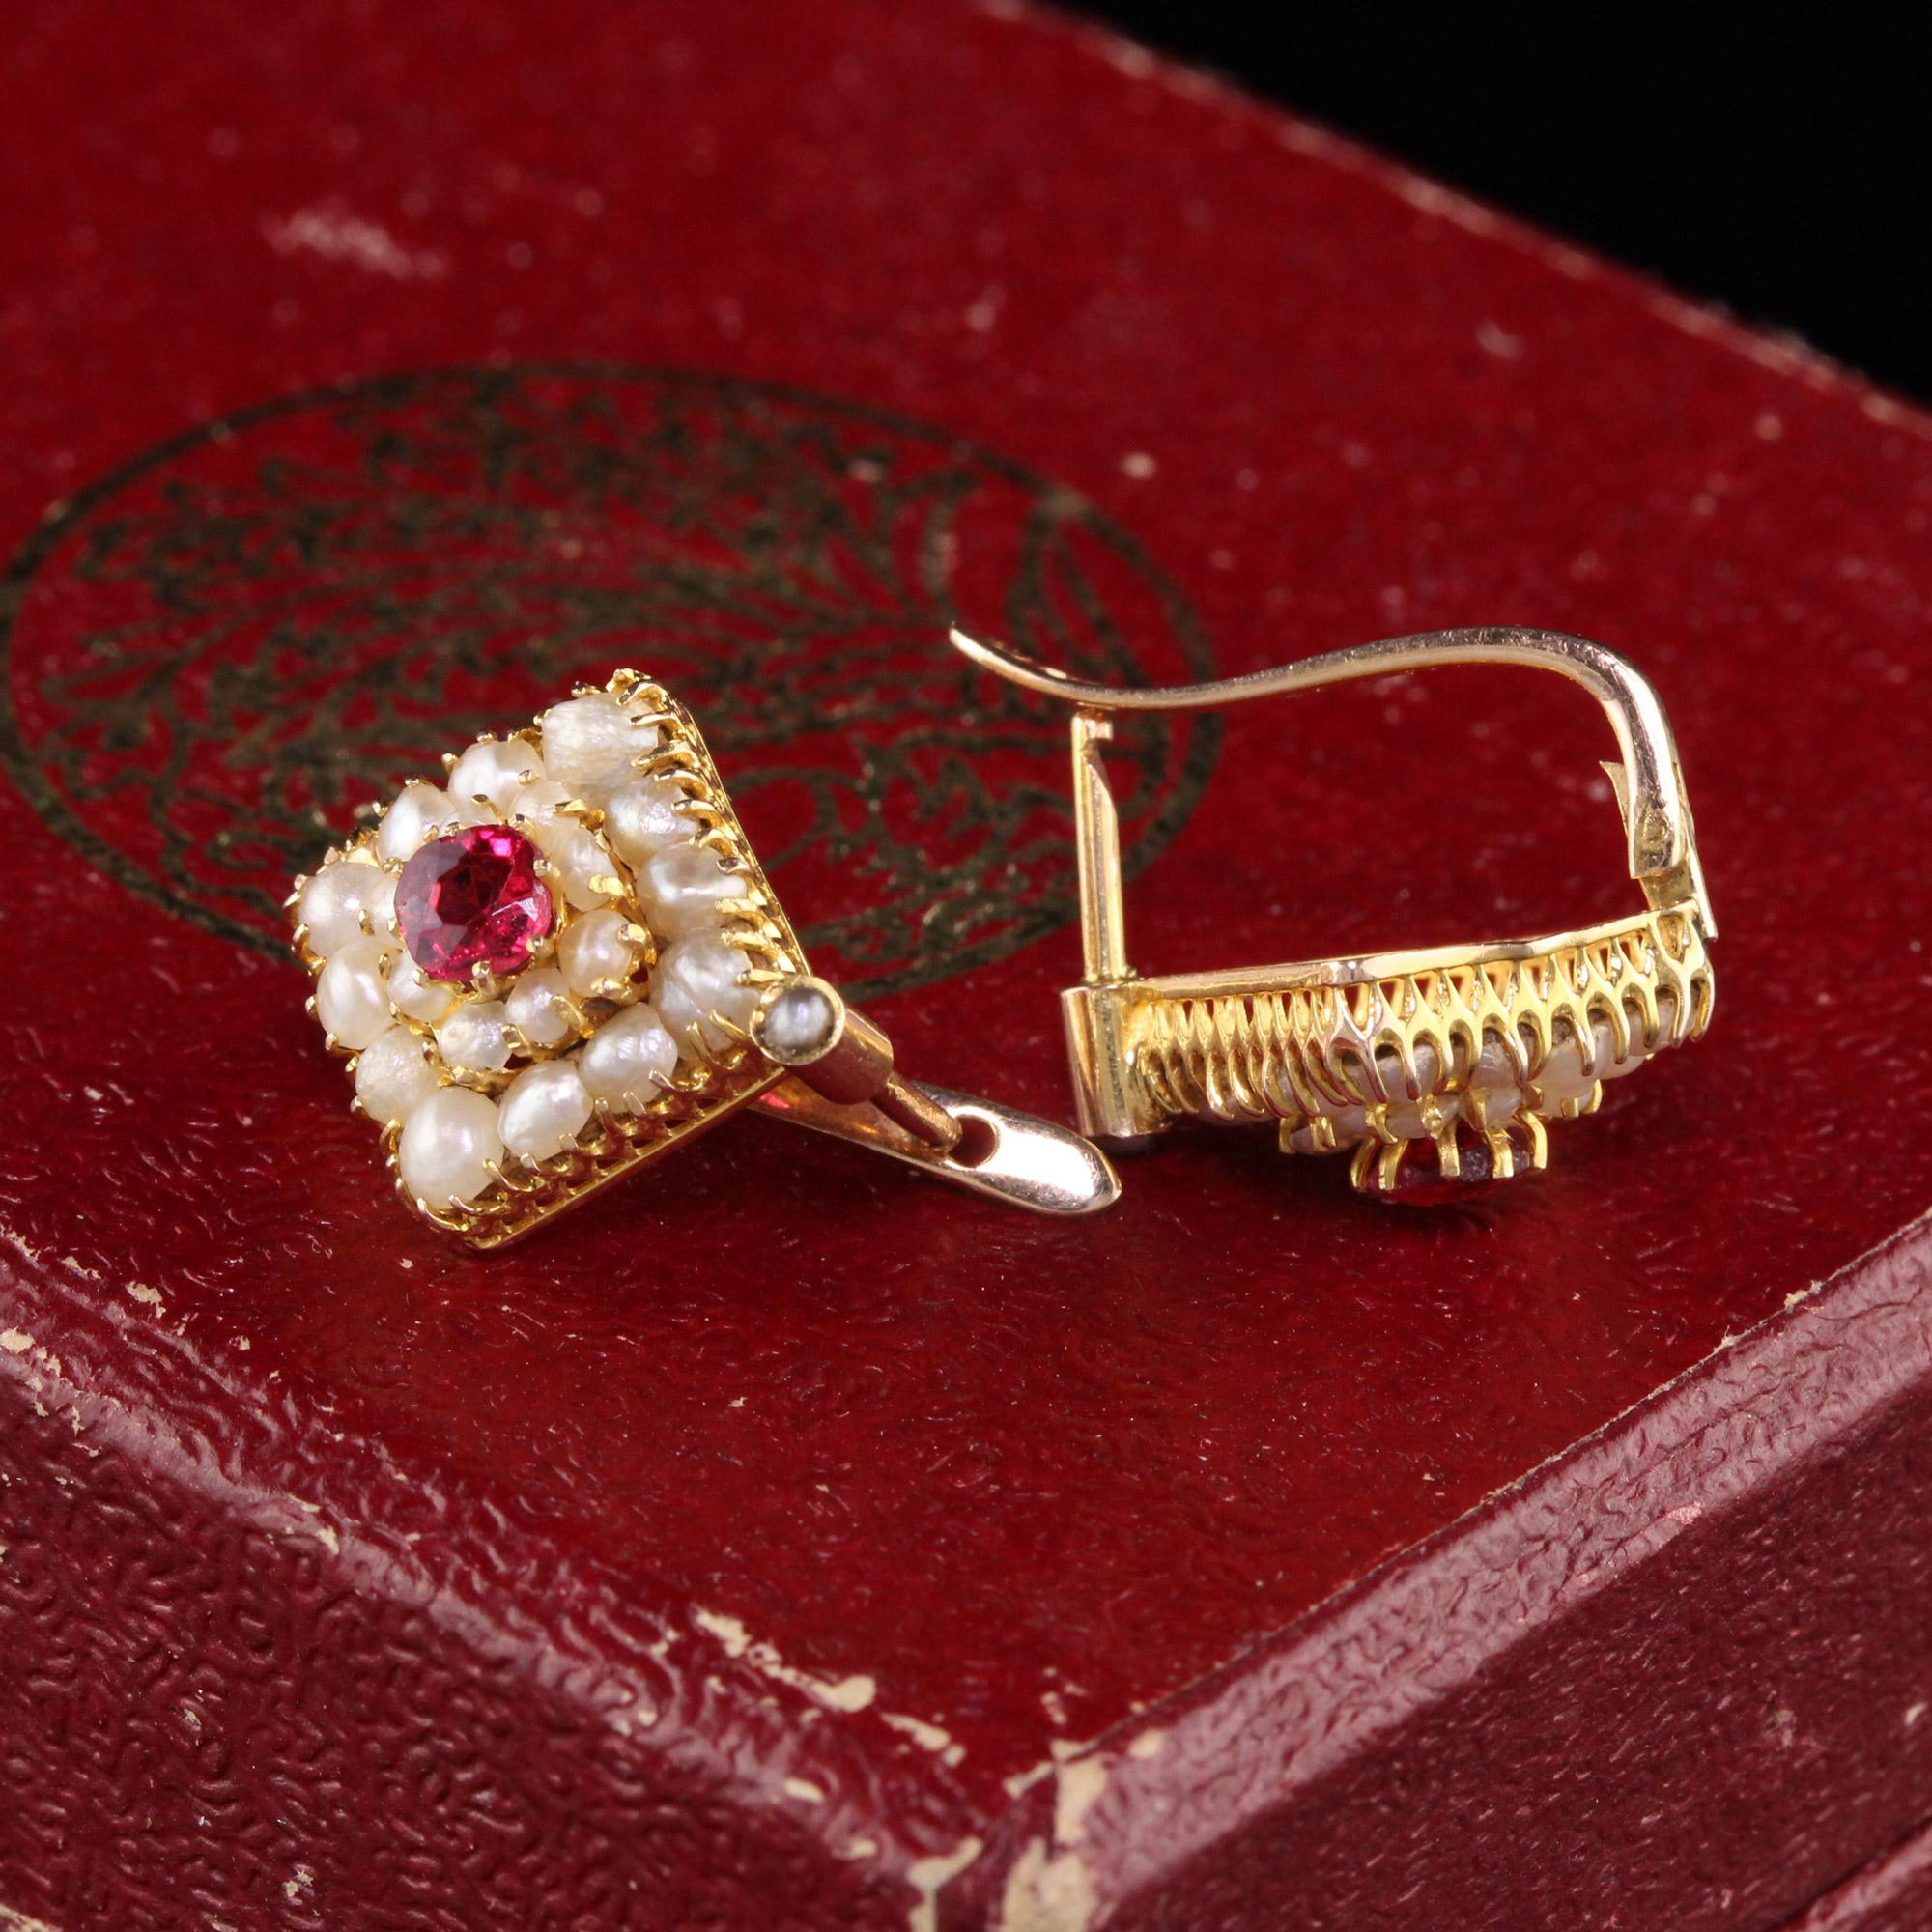 Gorgeous Antique Art Deco 18K Yellow Gold Seed Pearl Ruby Diamond Earrings. These earrings feature seed pearls on the ring with an old cushion ruby in the center.

Item #E0039

Metal: 18K Yellow Gold

Ruby: Approximately .60 cts

Weight: 2.8